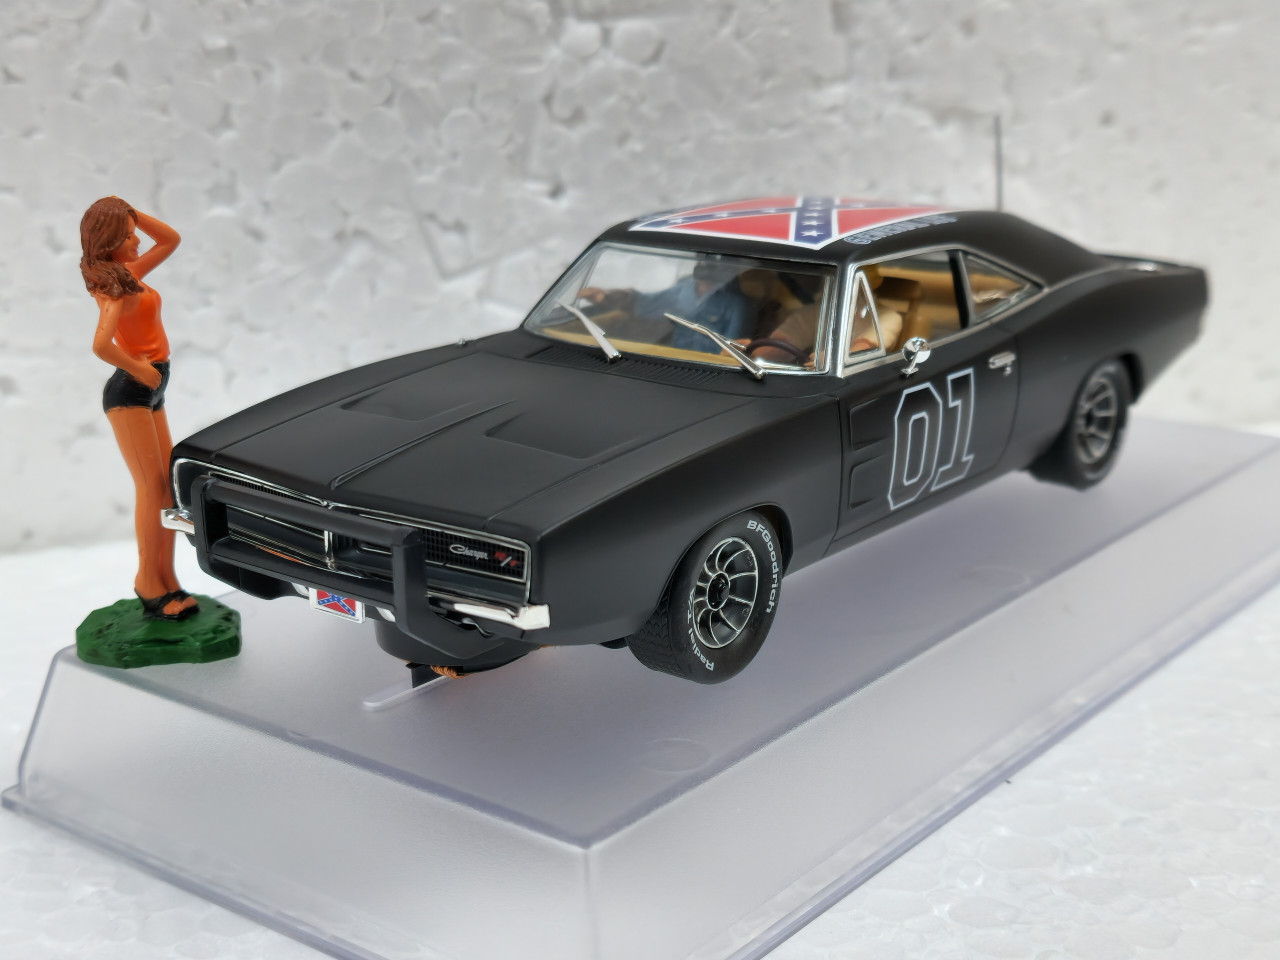 P148-DS Pioneer The General Lee '69 Dodge Charger - Dukes of Hazzard Black,  #01 1:32 Slot Car - Great Traditions